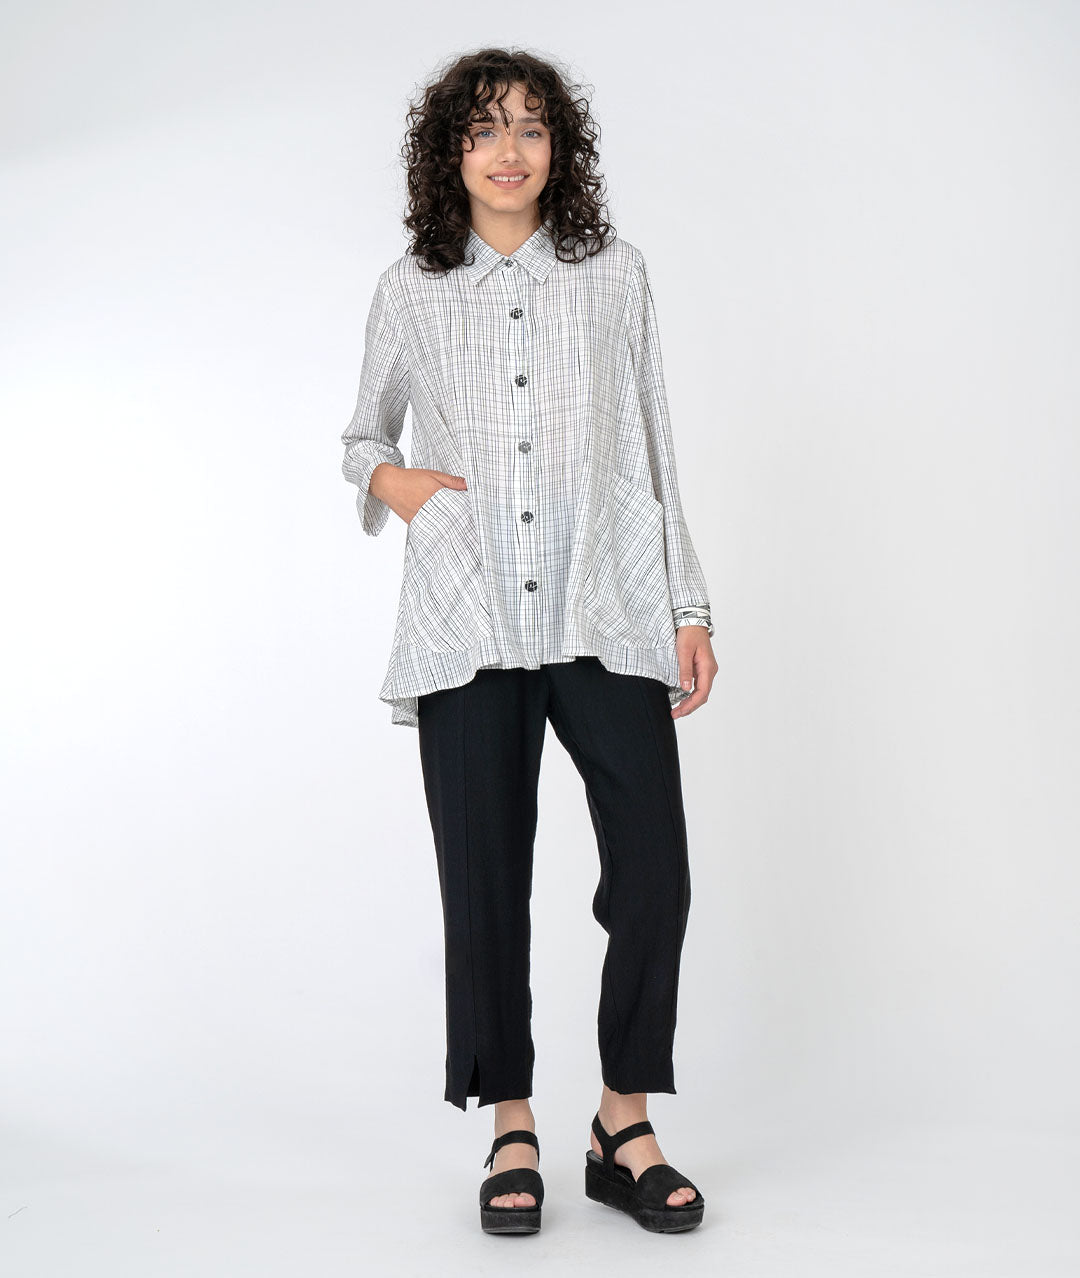 model in a slim black pant with a white button down top with a black grid print